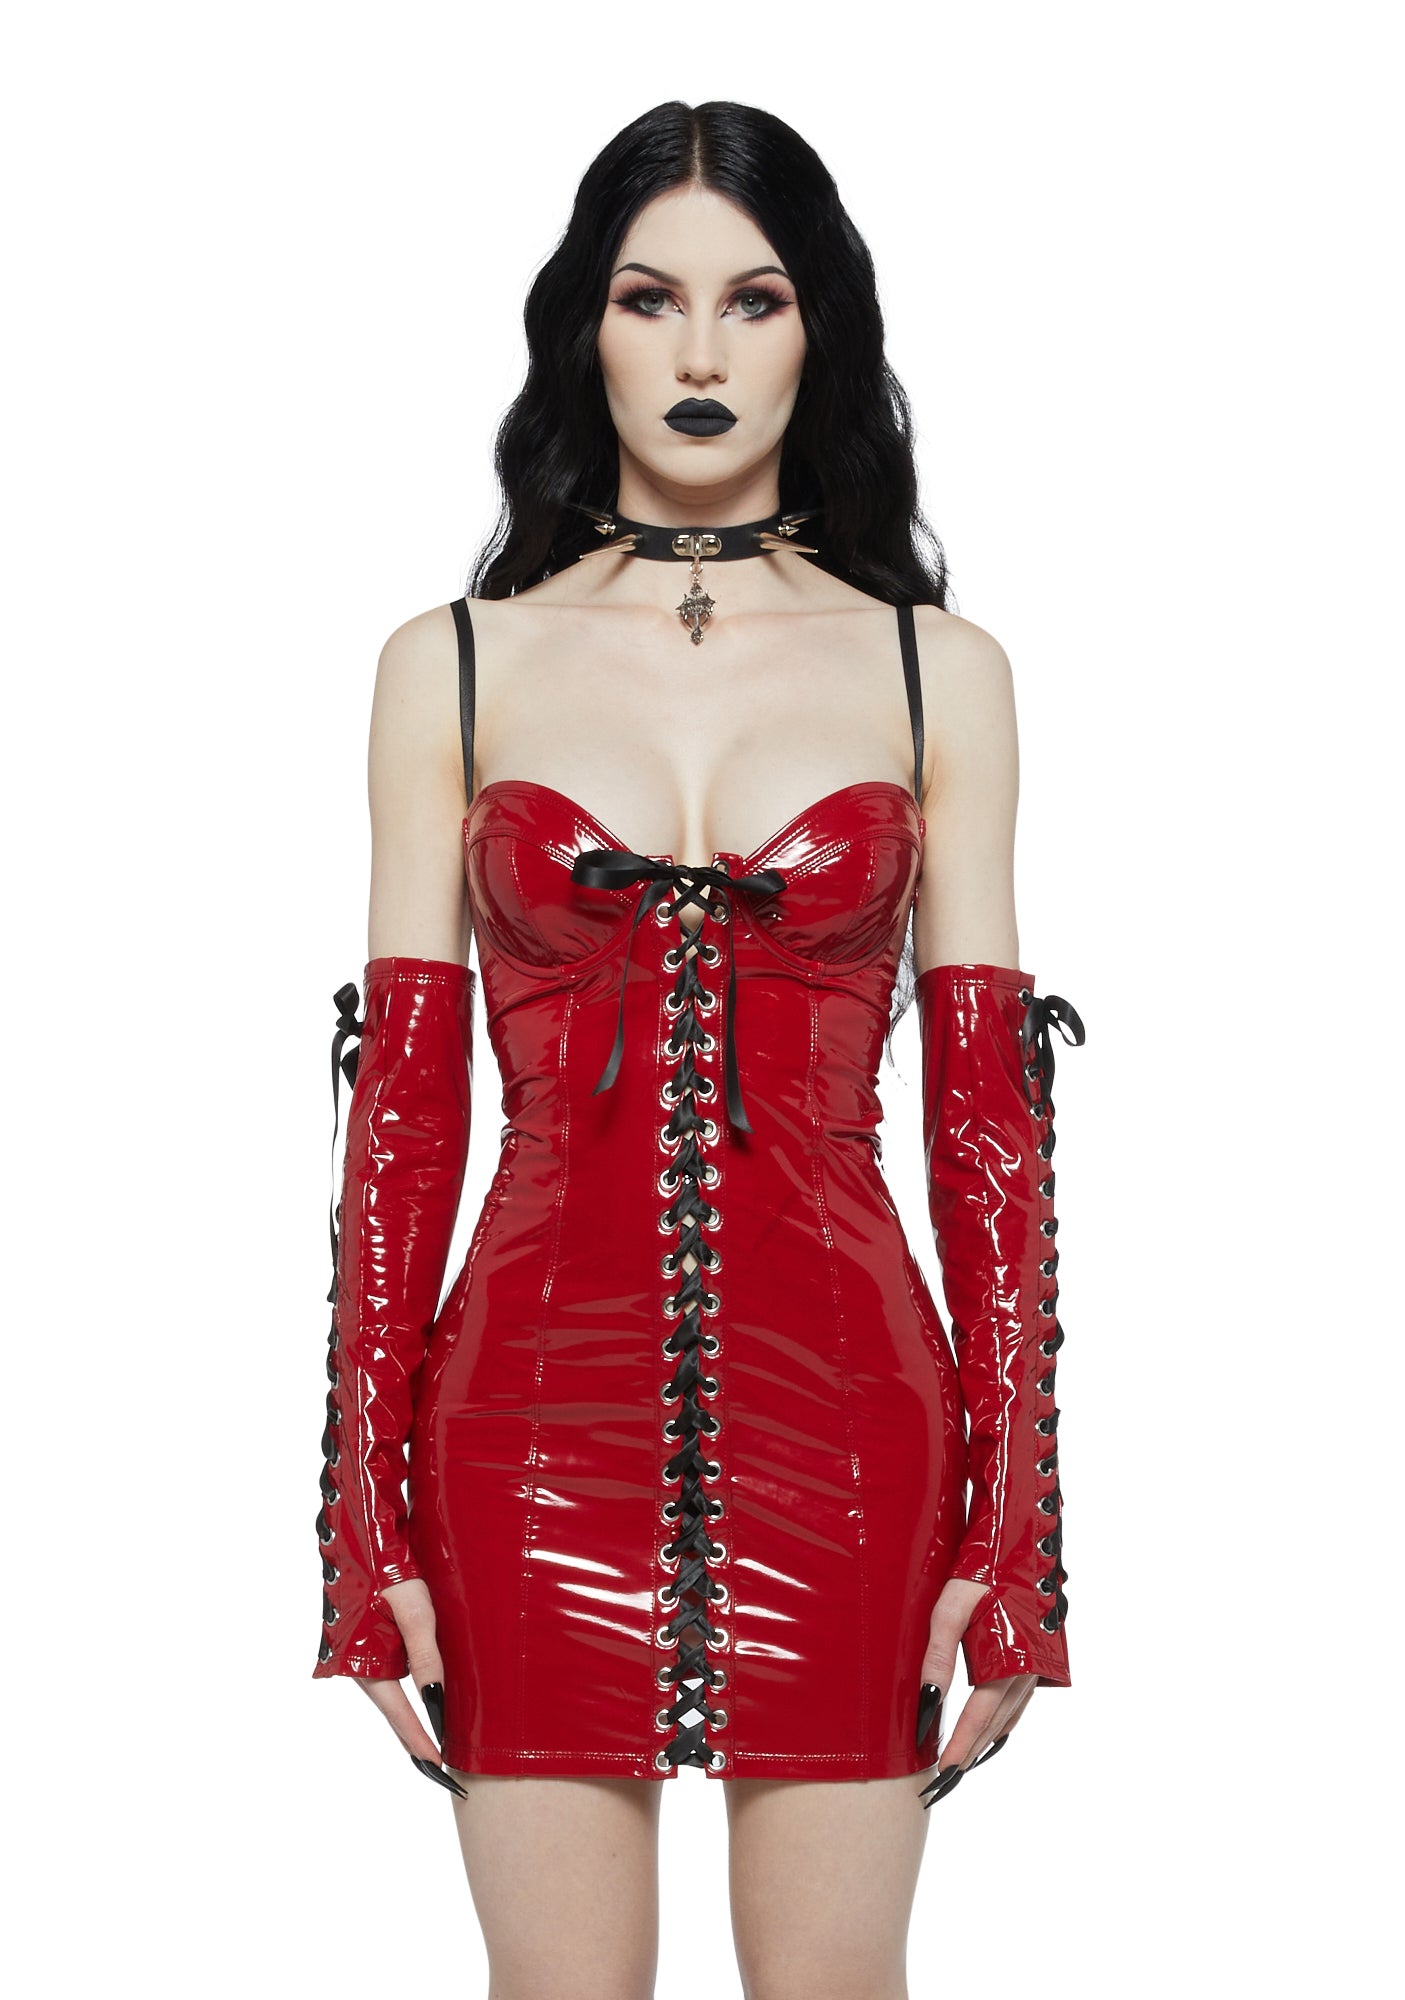 Widow Patent Vinyl Bodycon Lace Up Dress - Red